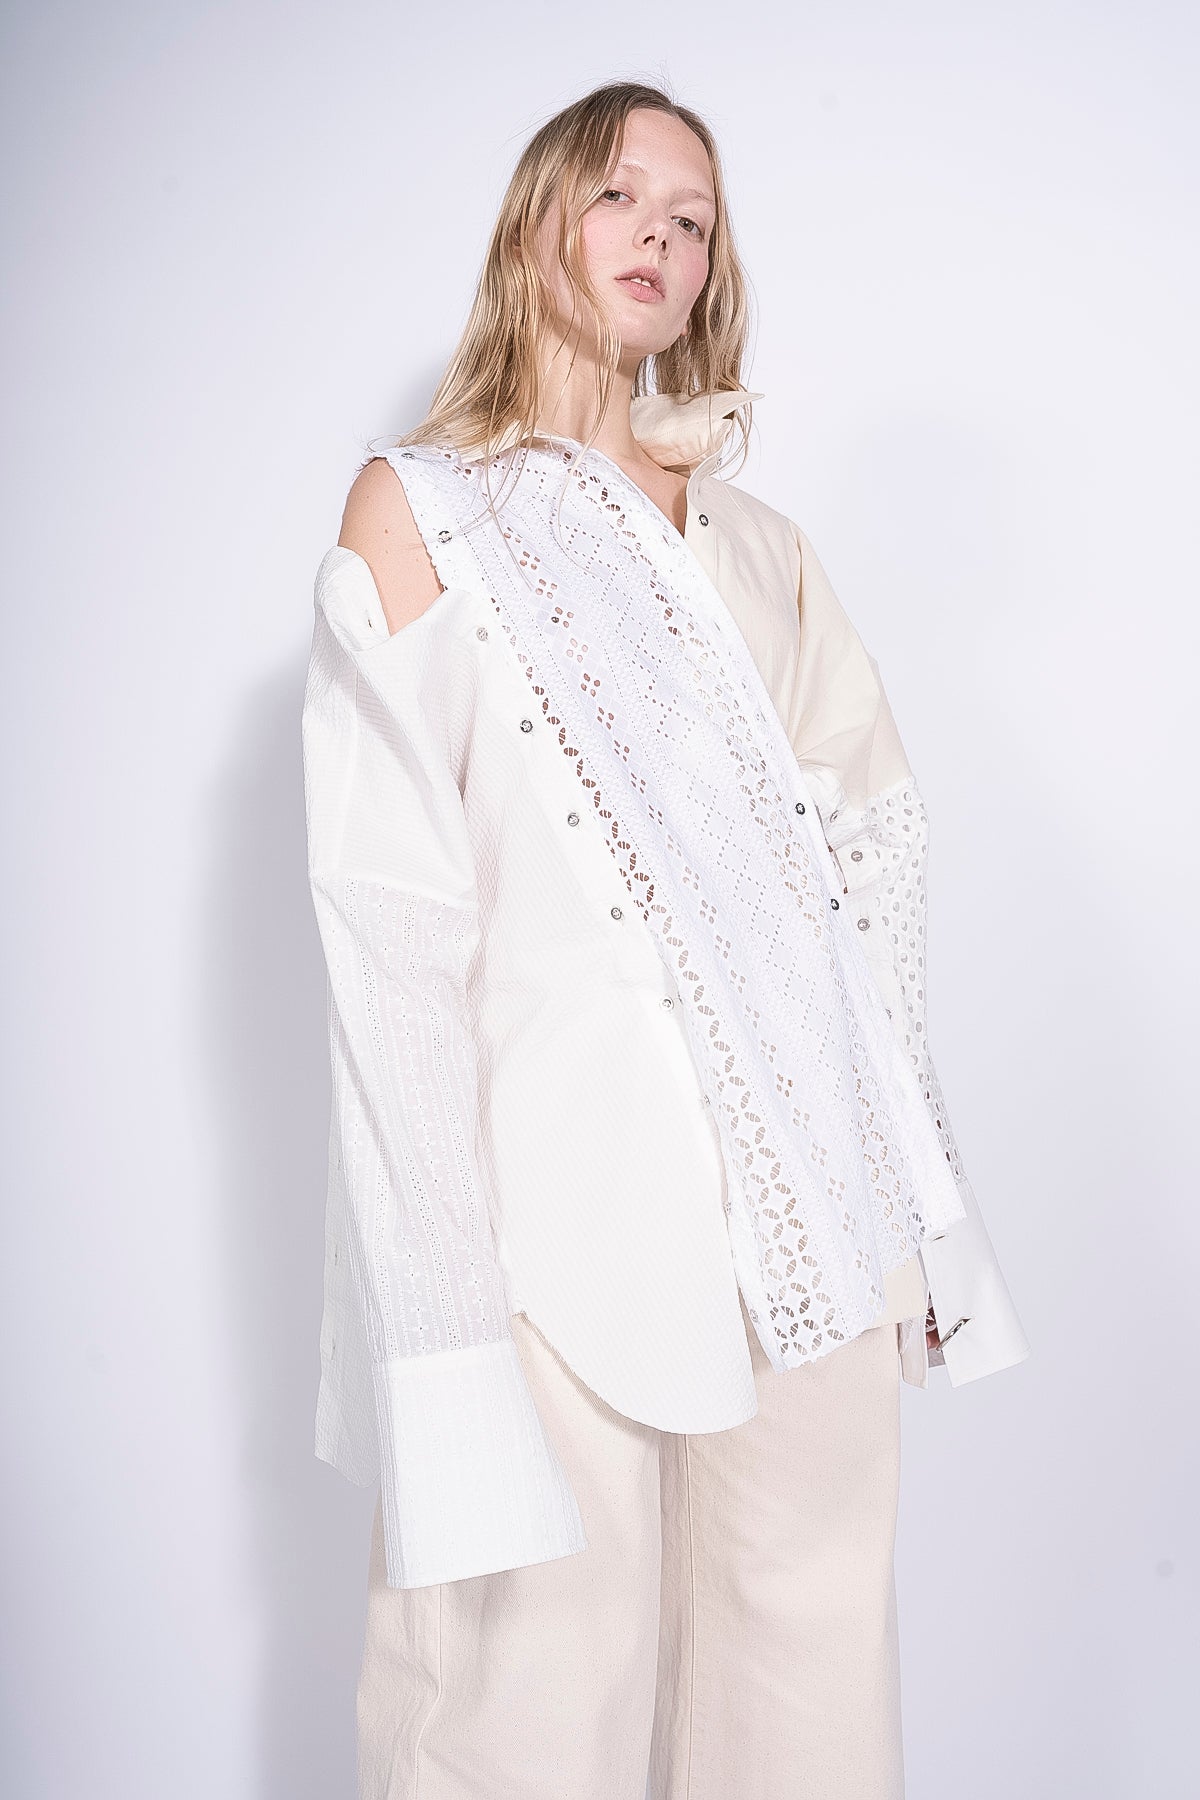 WHITE PATCHWORK DECONSTRUCTED SHIRT marques almeida